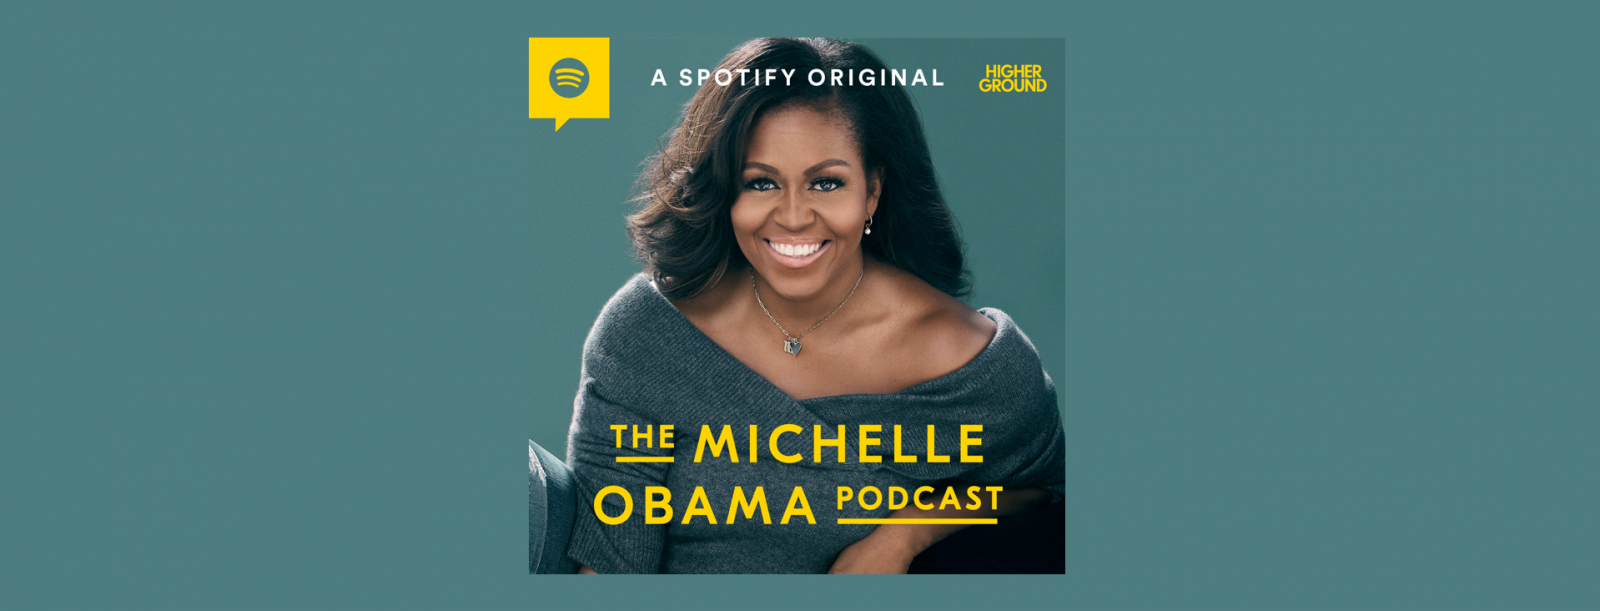 Spotify debuts The Michelle Obama Podcast series releasing later this month